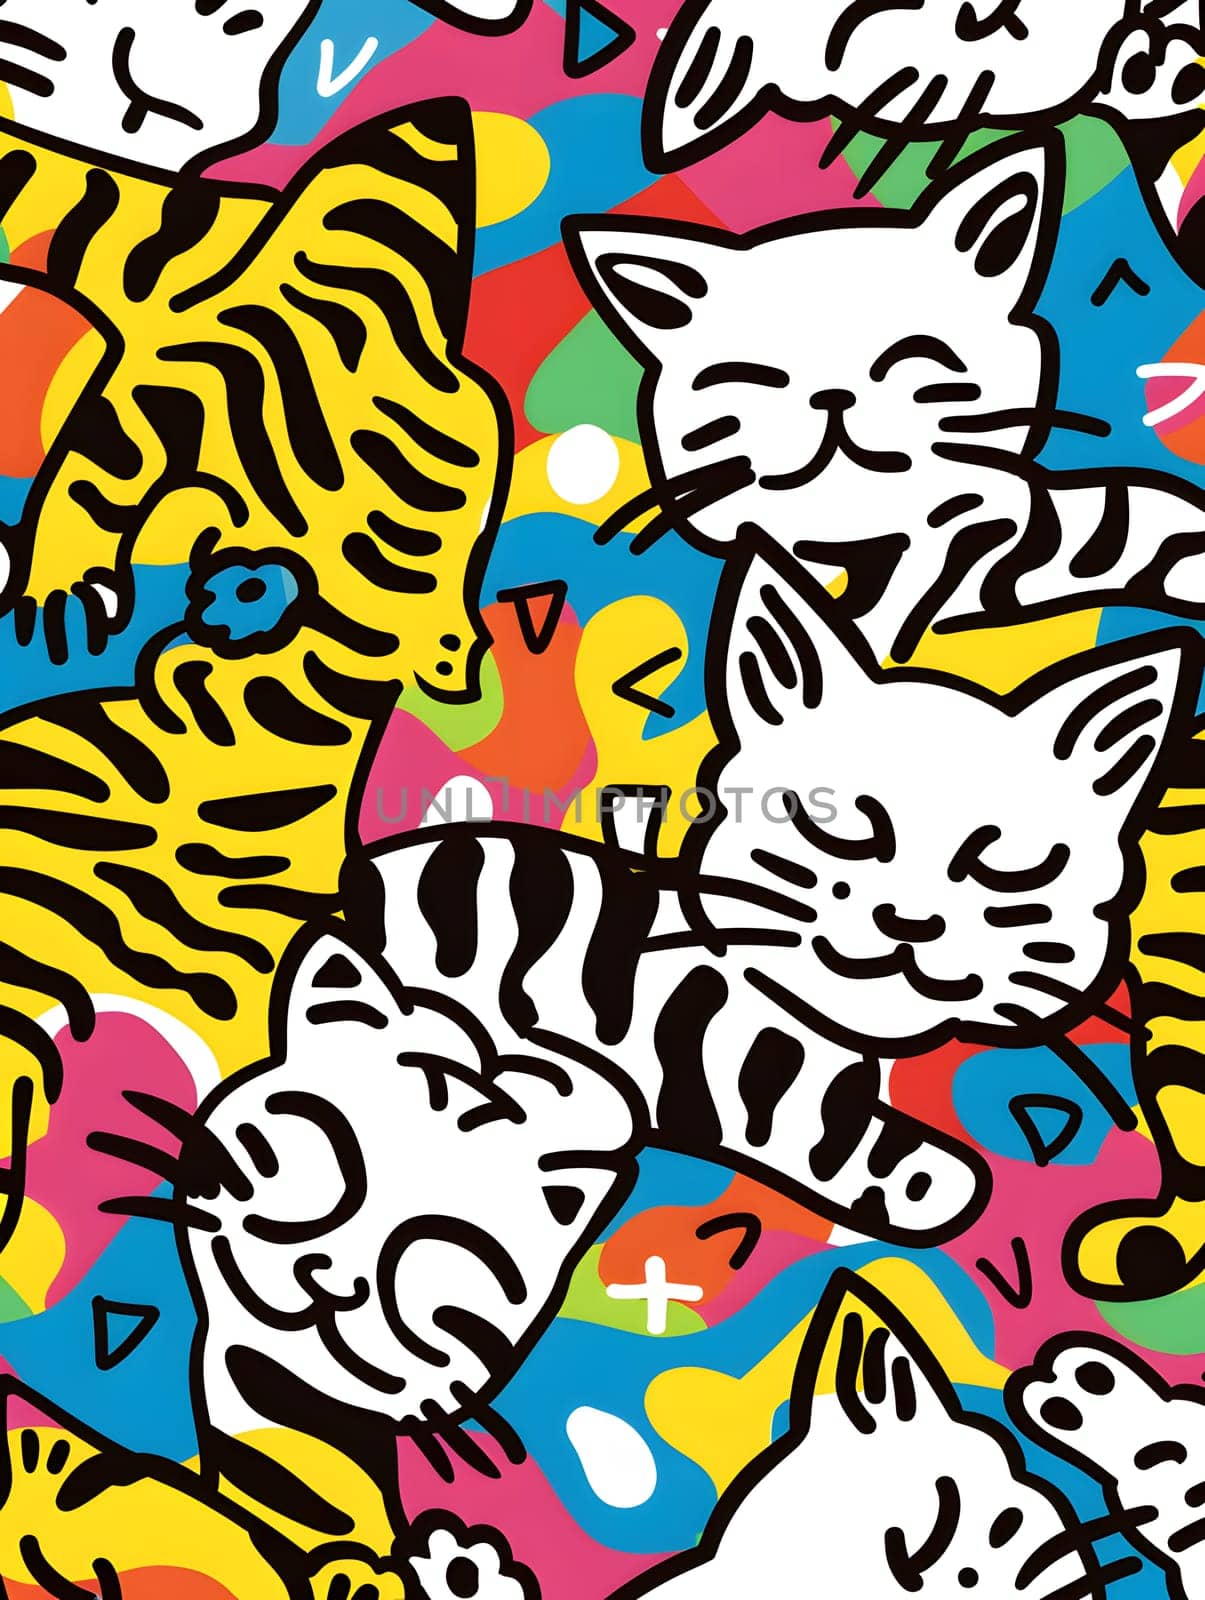 A pile of small to mediumsized cats on colorful textile background by Nadtochiy